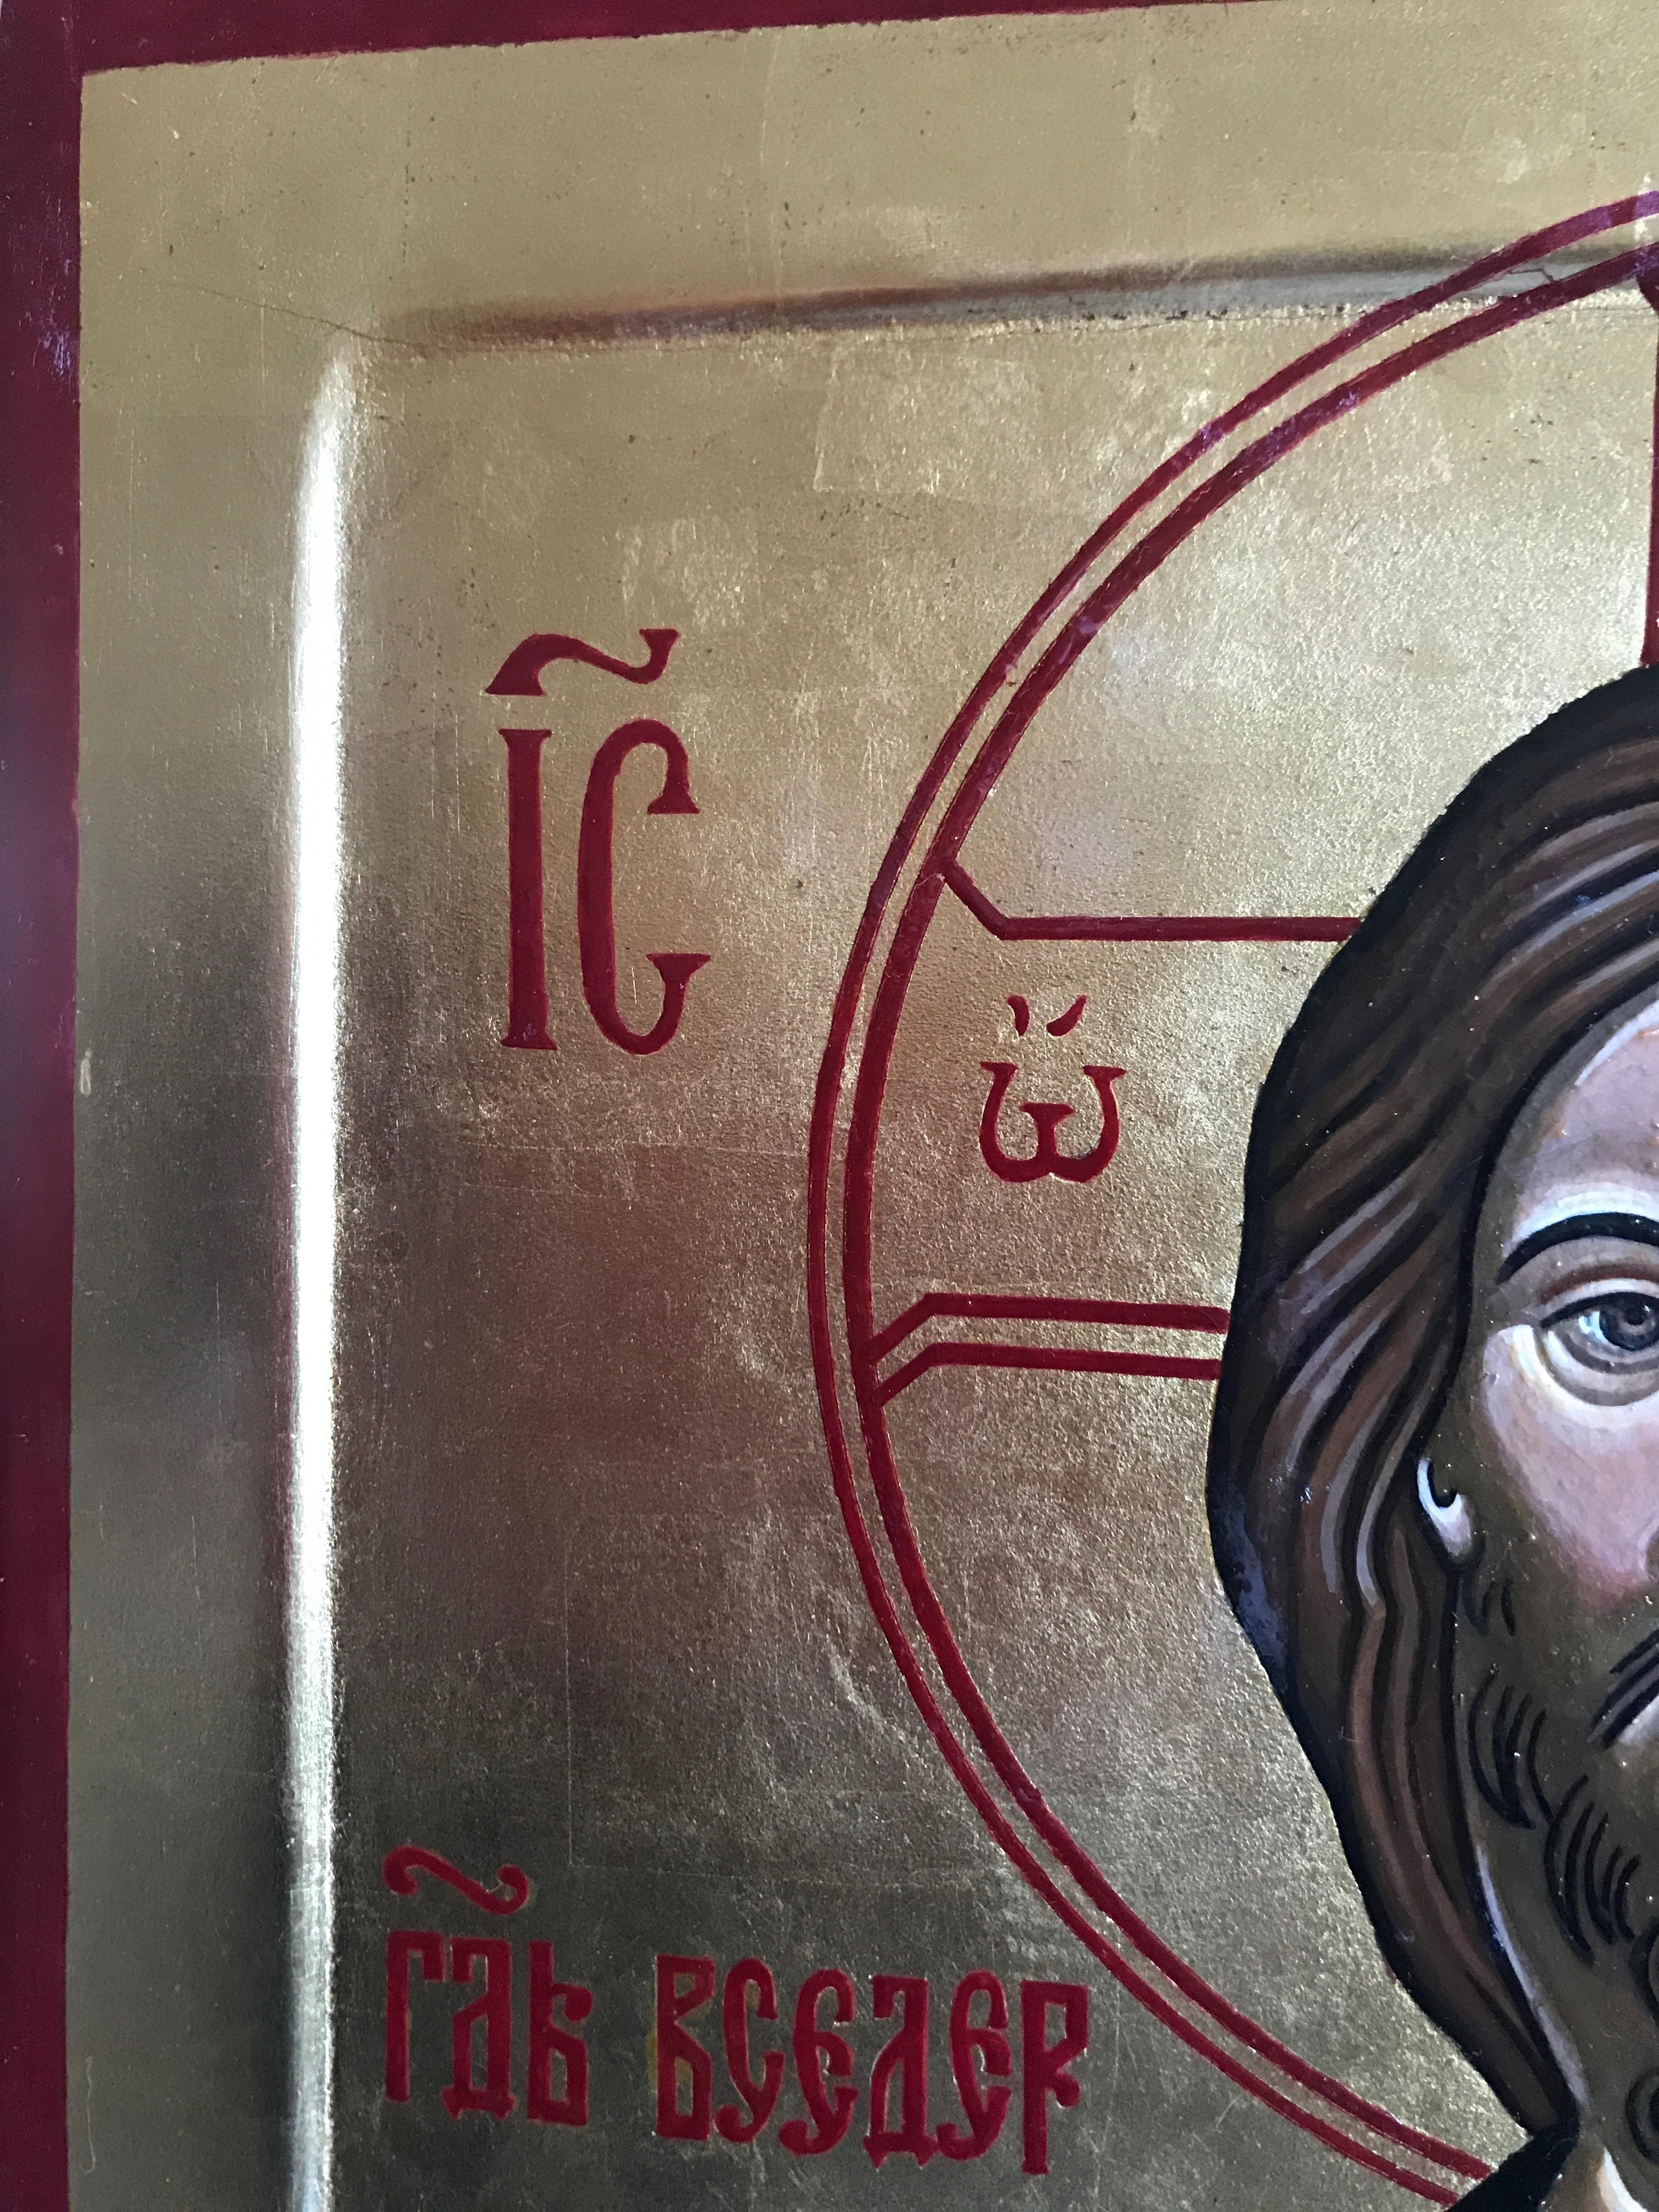 Christ Pantocrator, after a Russian icon of Andrei Rublev from the 14th century - Byzantine Mixed Media Art by Oliver Samsinger